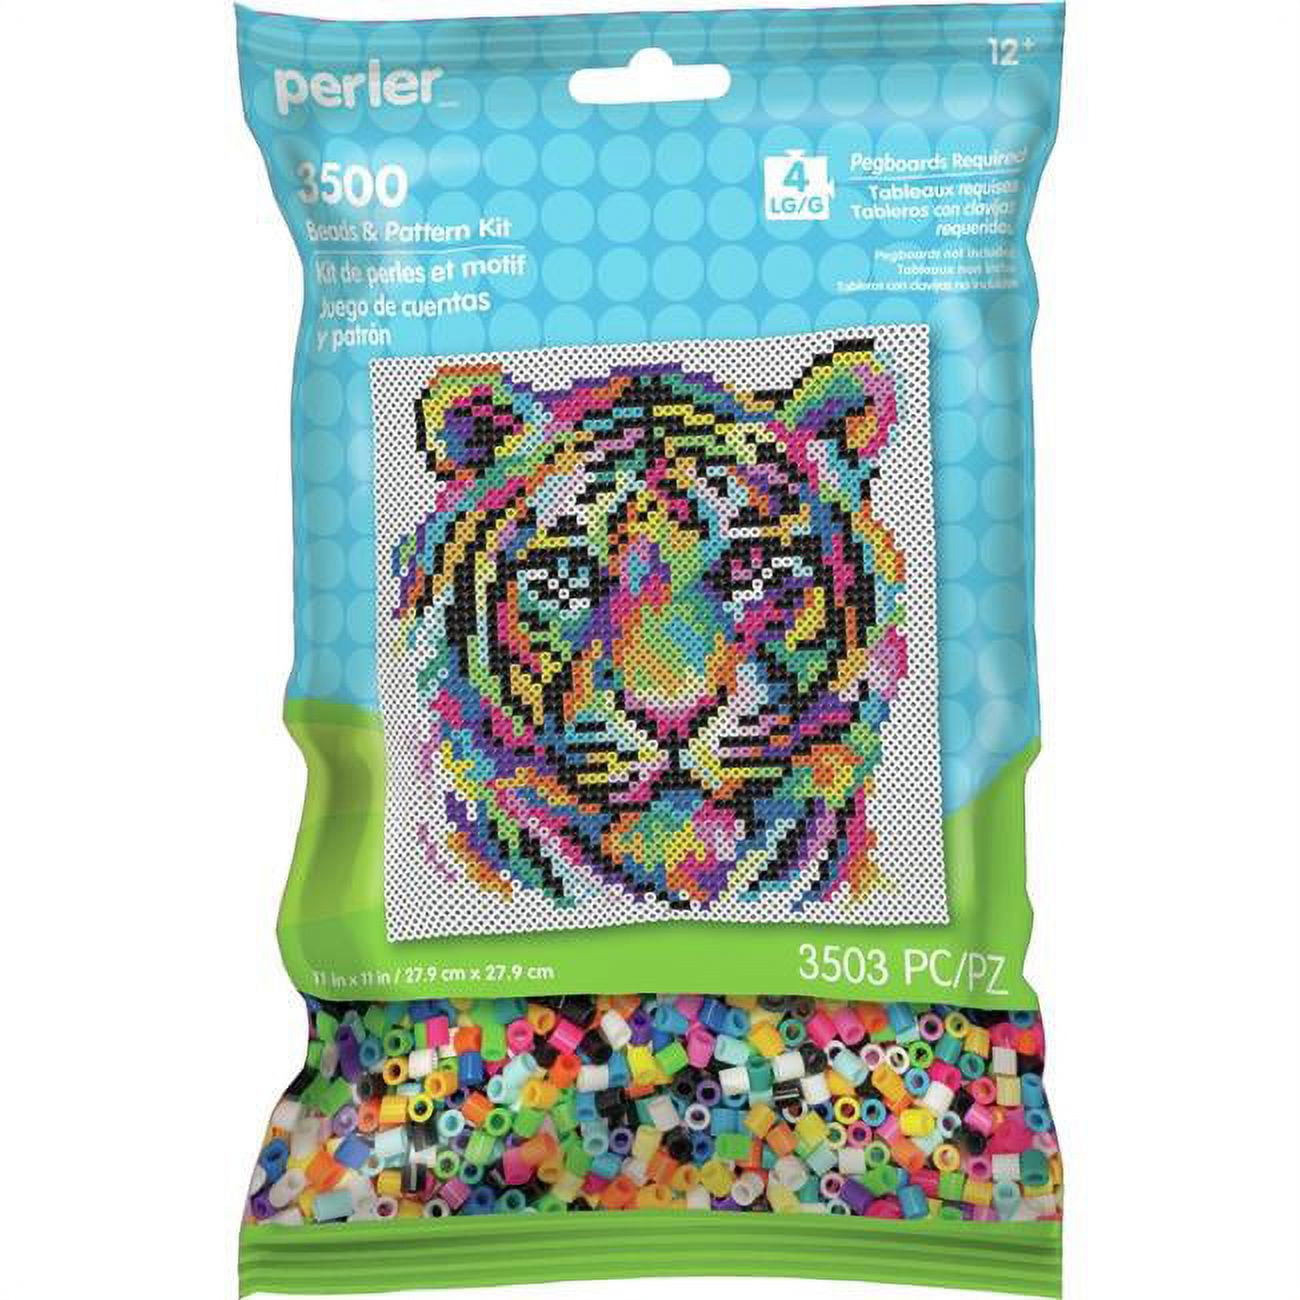 Perler Beads Assorted Fuse Beads Tray for Kids Crafts with Perler Bead  Pattern Book, 4001 pcs